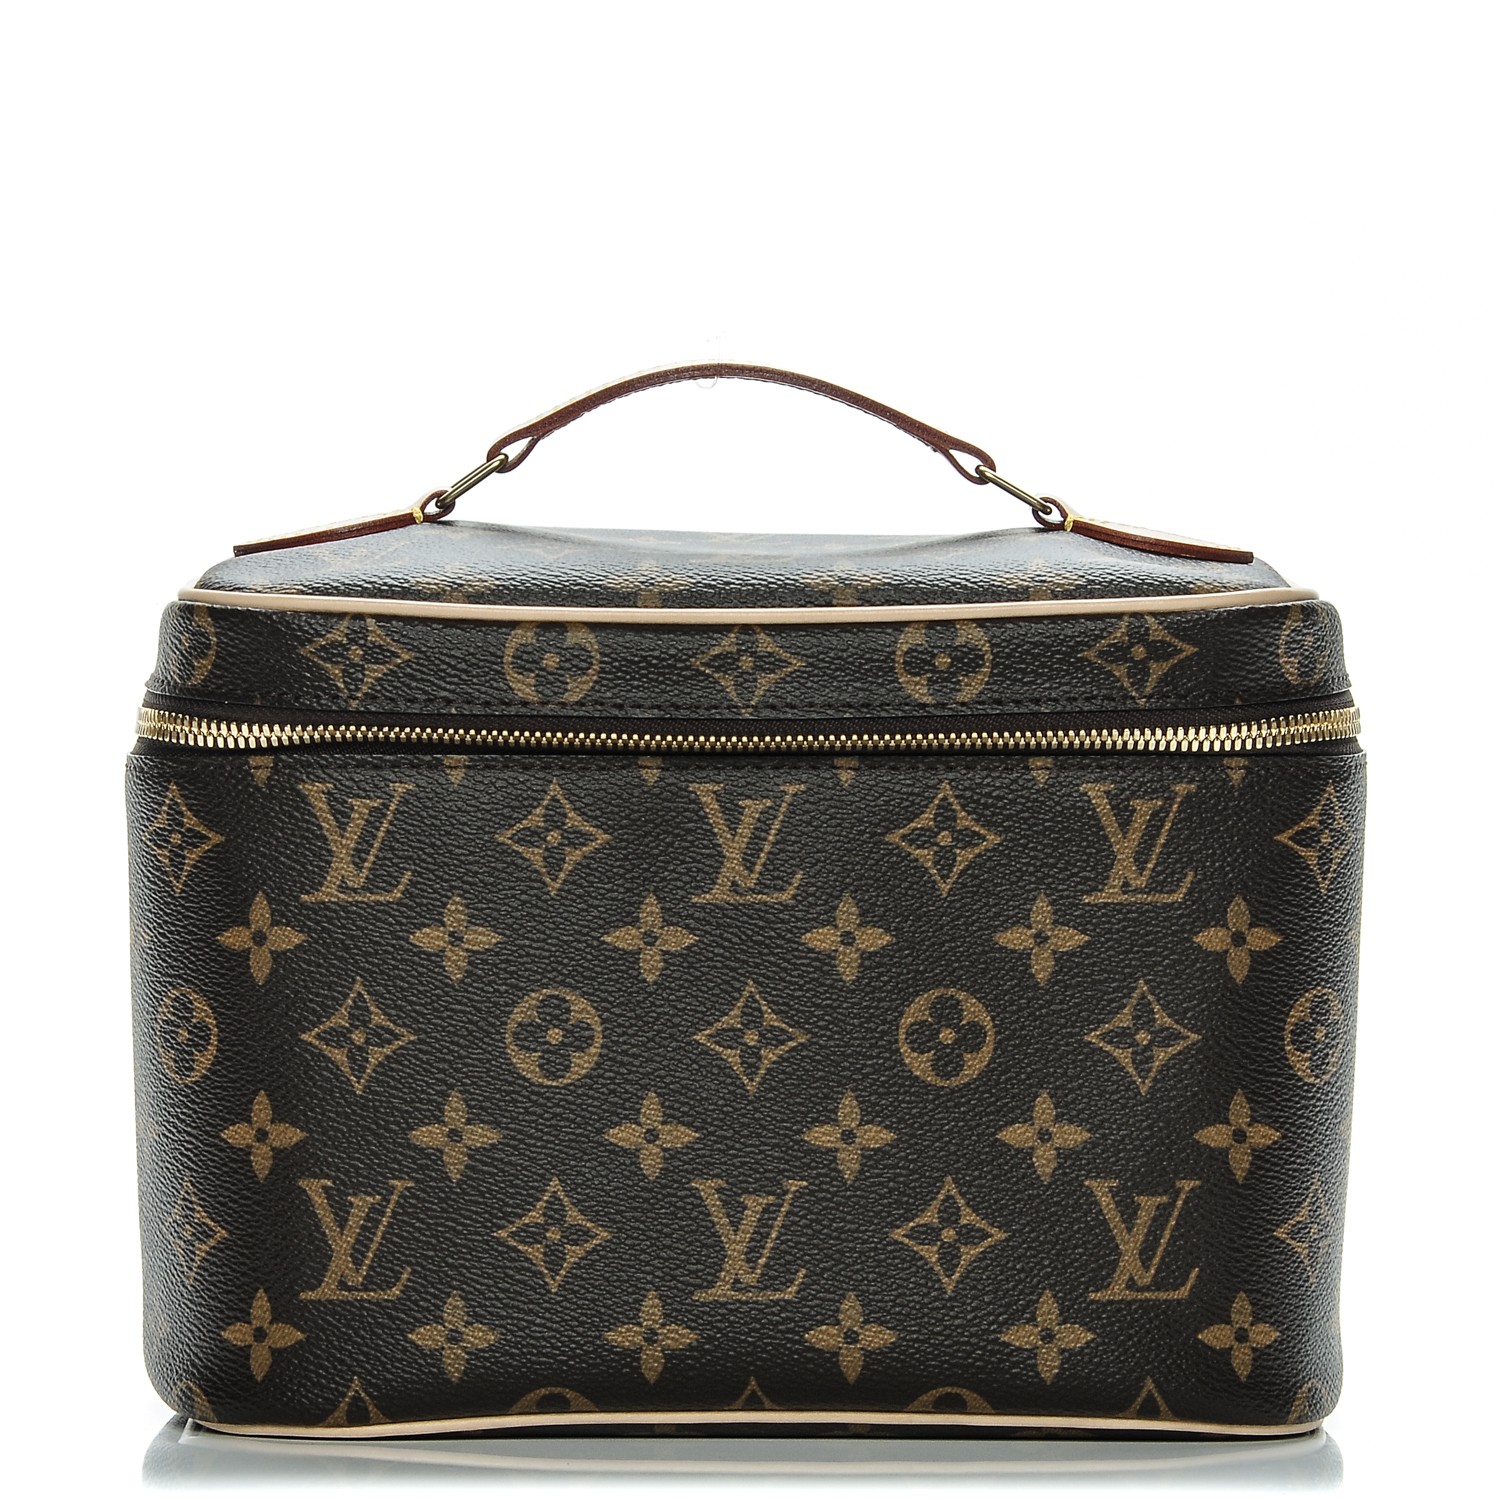 Bag and Purse Organizer with Singular Style for Louis Vuitton Nice and Nice  BB